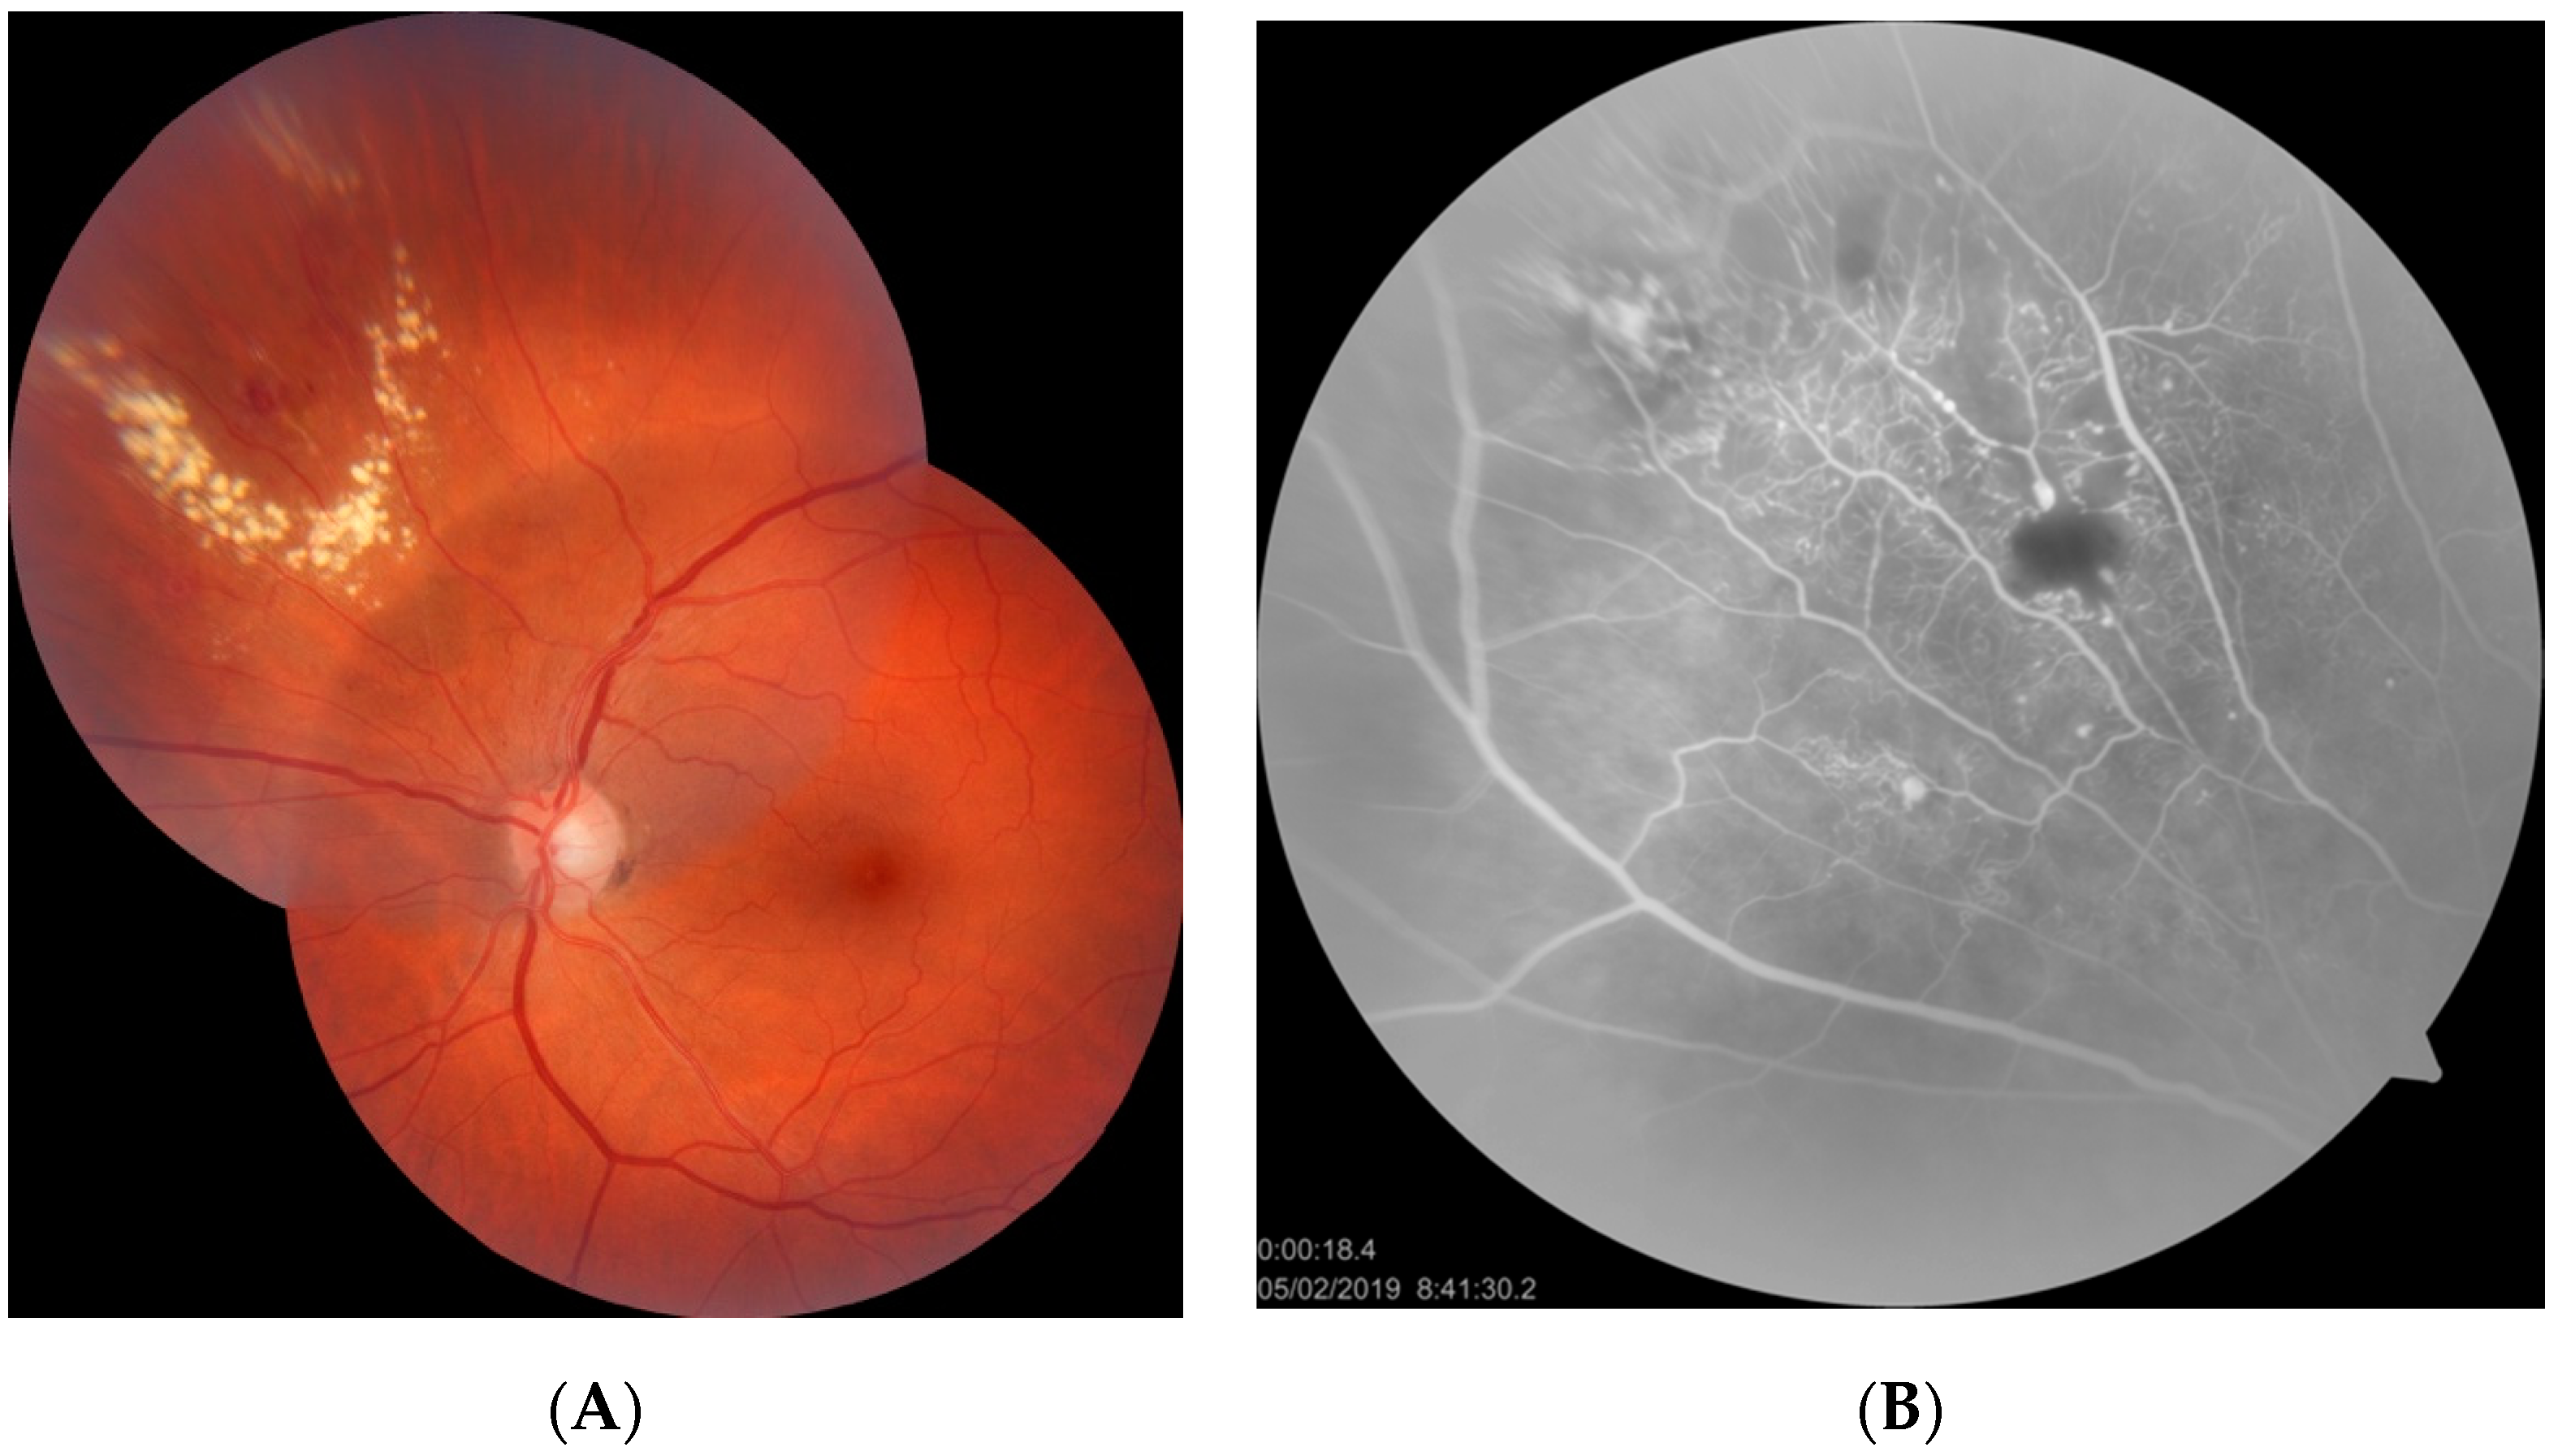 What is the Retina?  Review of the Retina